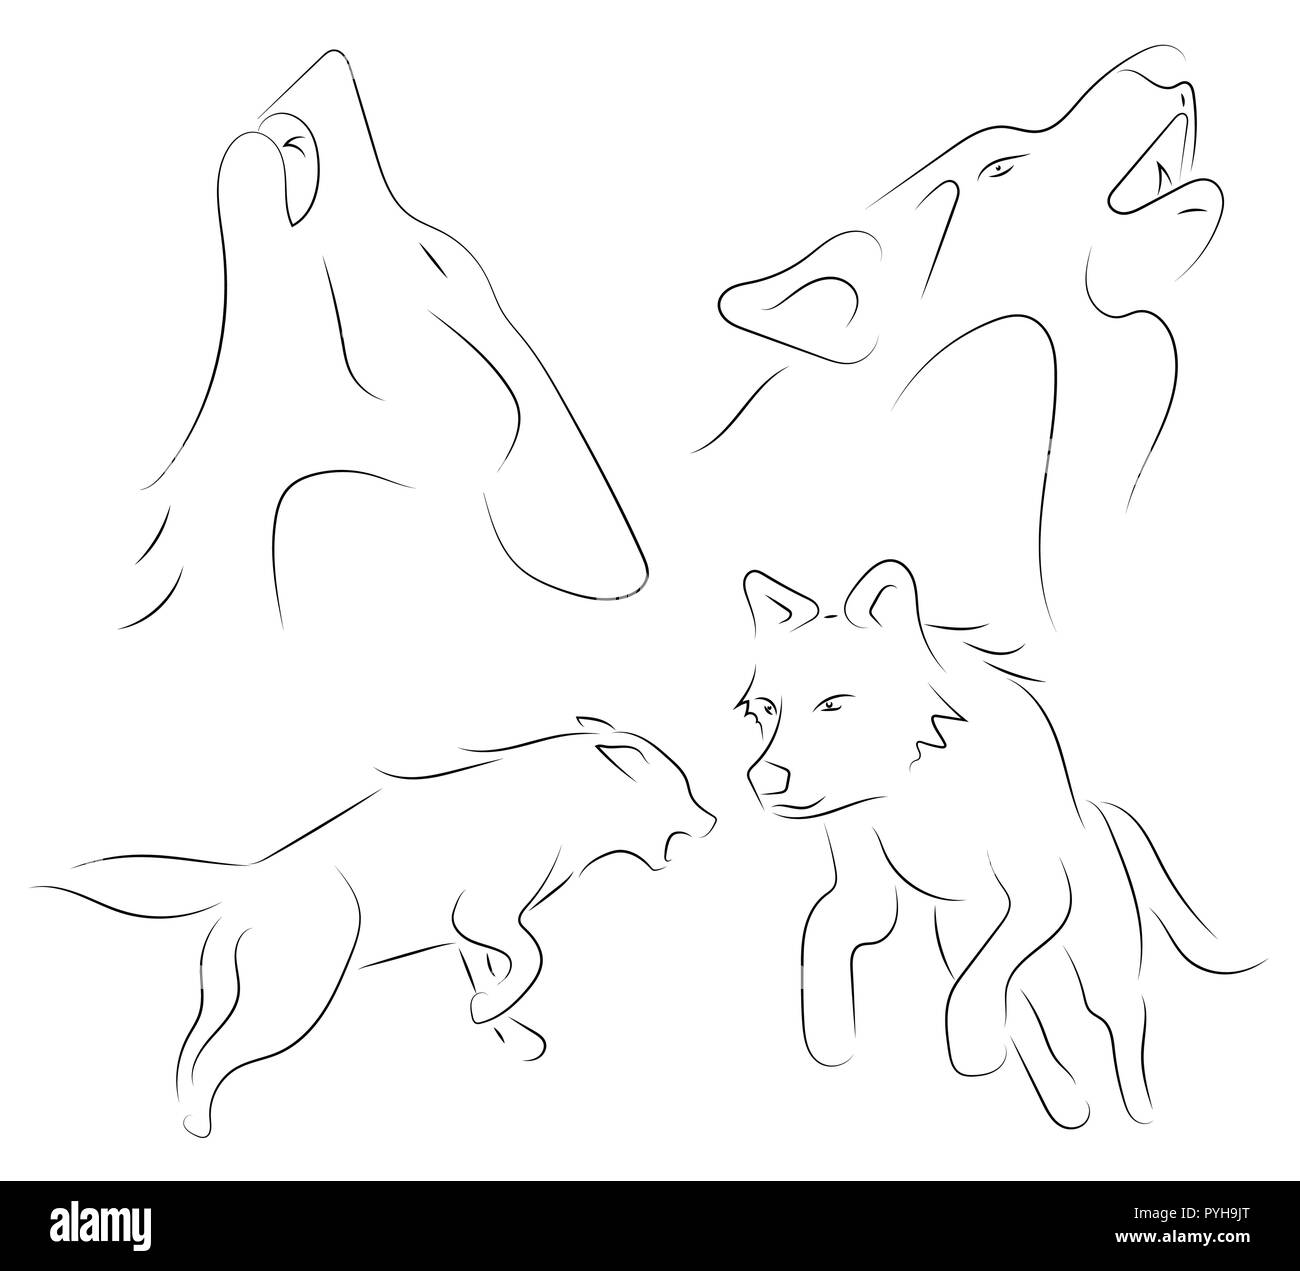 Black line wolfs on white background. Hand drawn linear sketch. Vector graphic animal. Stock Vector